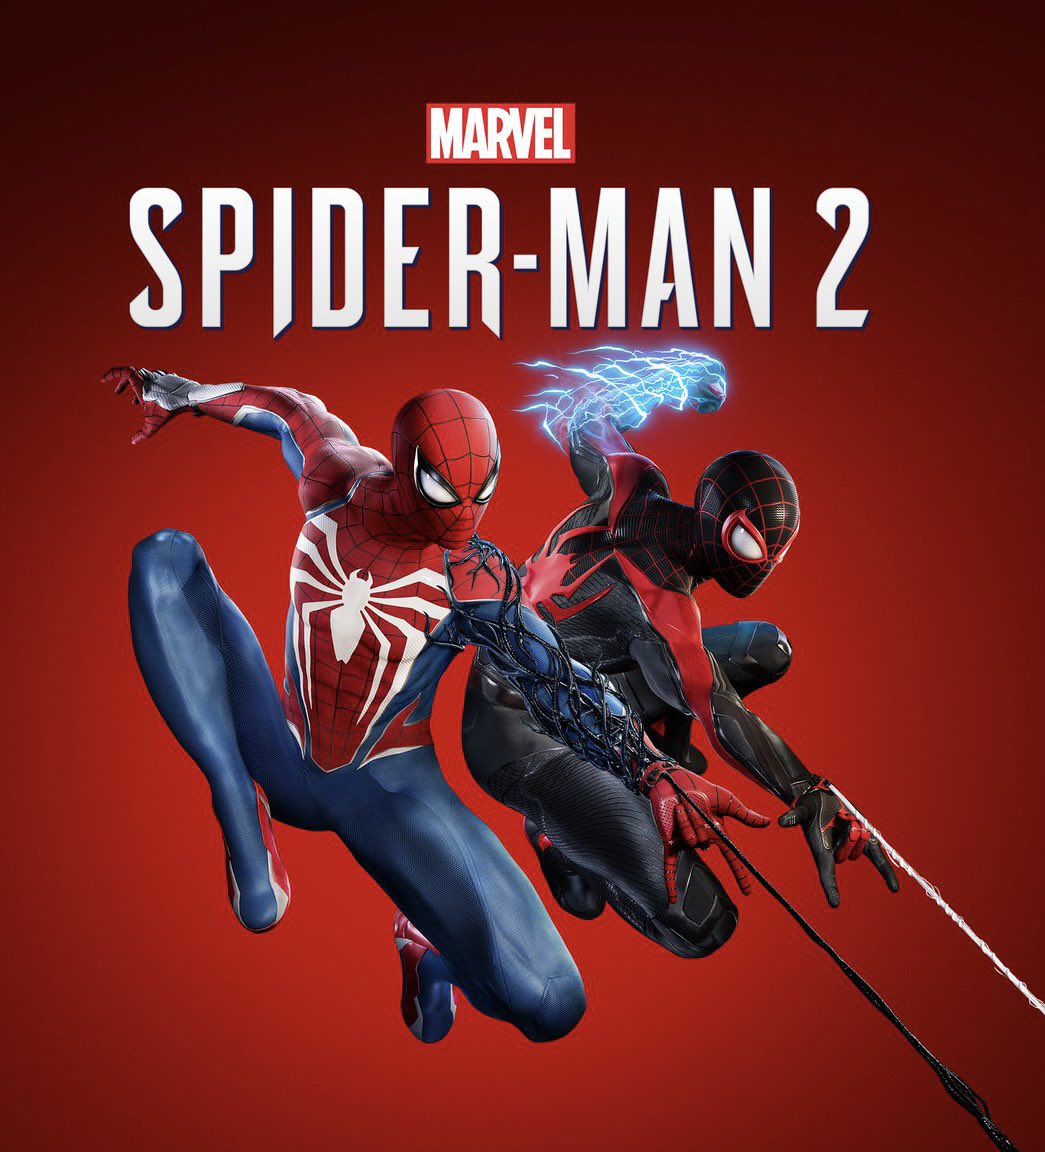 RT @DiscussingFilm: Official poster for ‘SPIDER-MAN 2’.

The game releases on October 20. https://t.co/cpXB7tGnrH